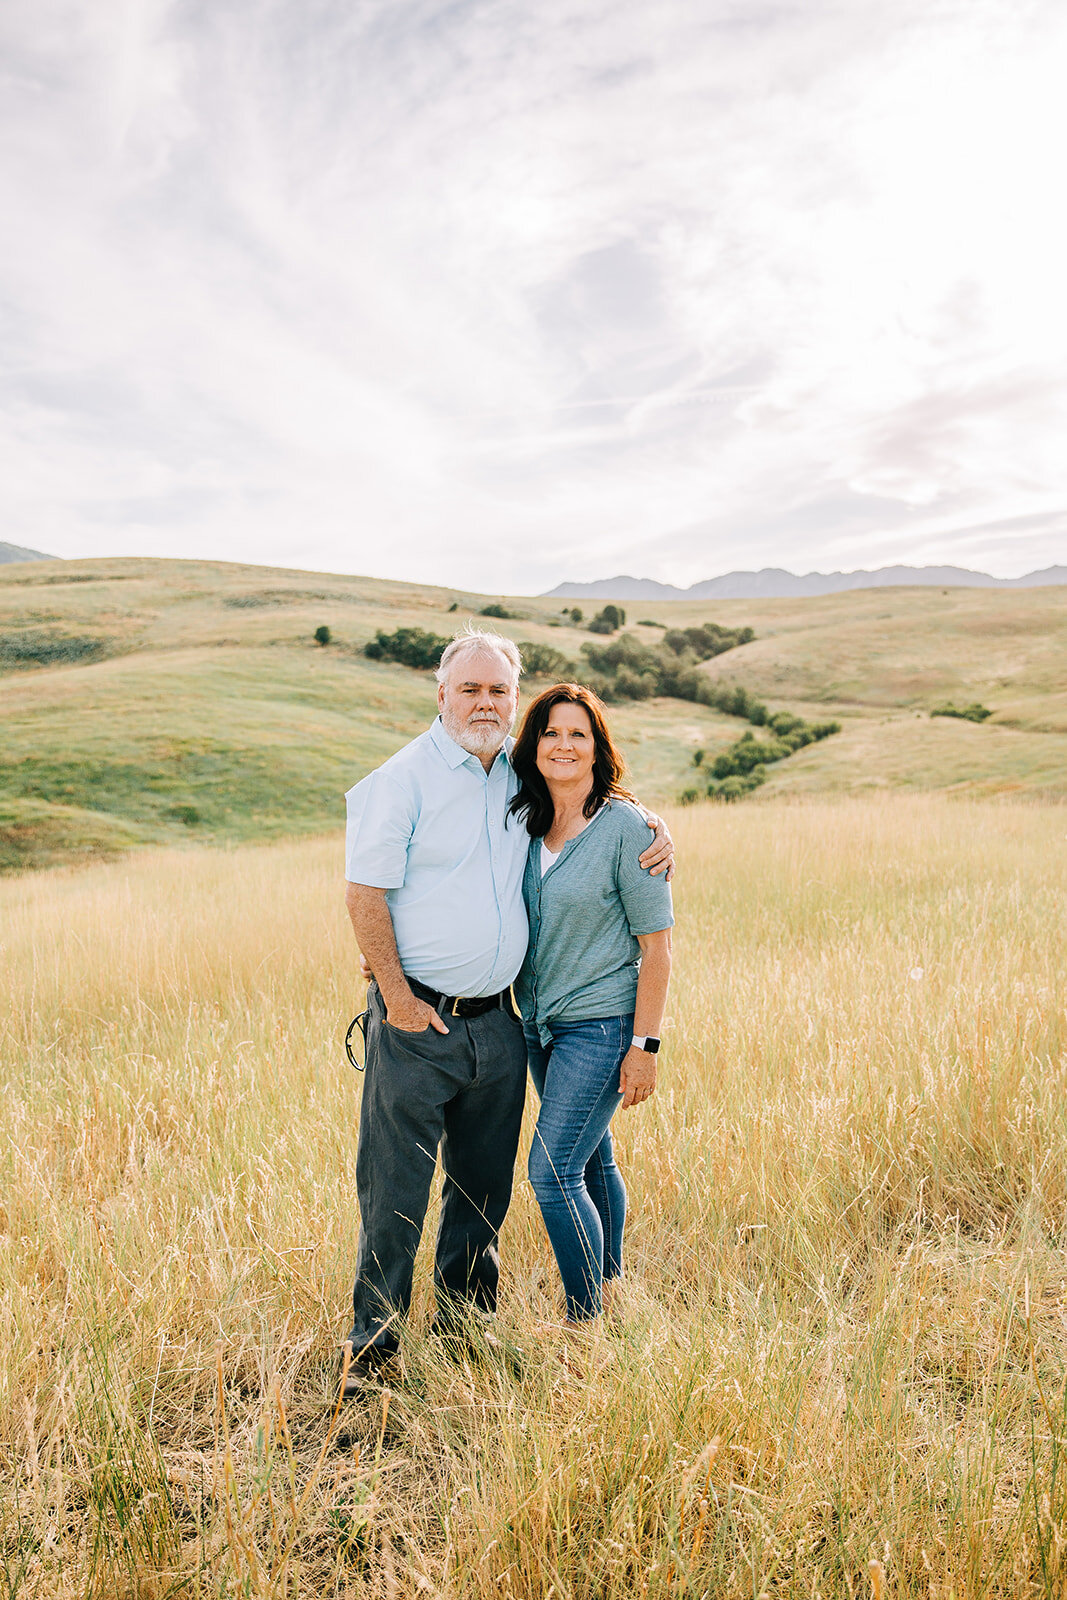  extended family photos mom and dad yellow fields rolling hills beautiful location in hyrum utah for family pictures blue shirt shades of blue coordinating outfits matching outfits for family photos by bella alder photography grandma and grandpa posi